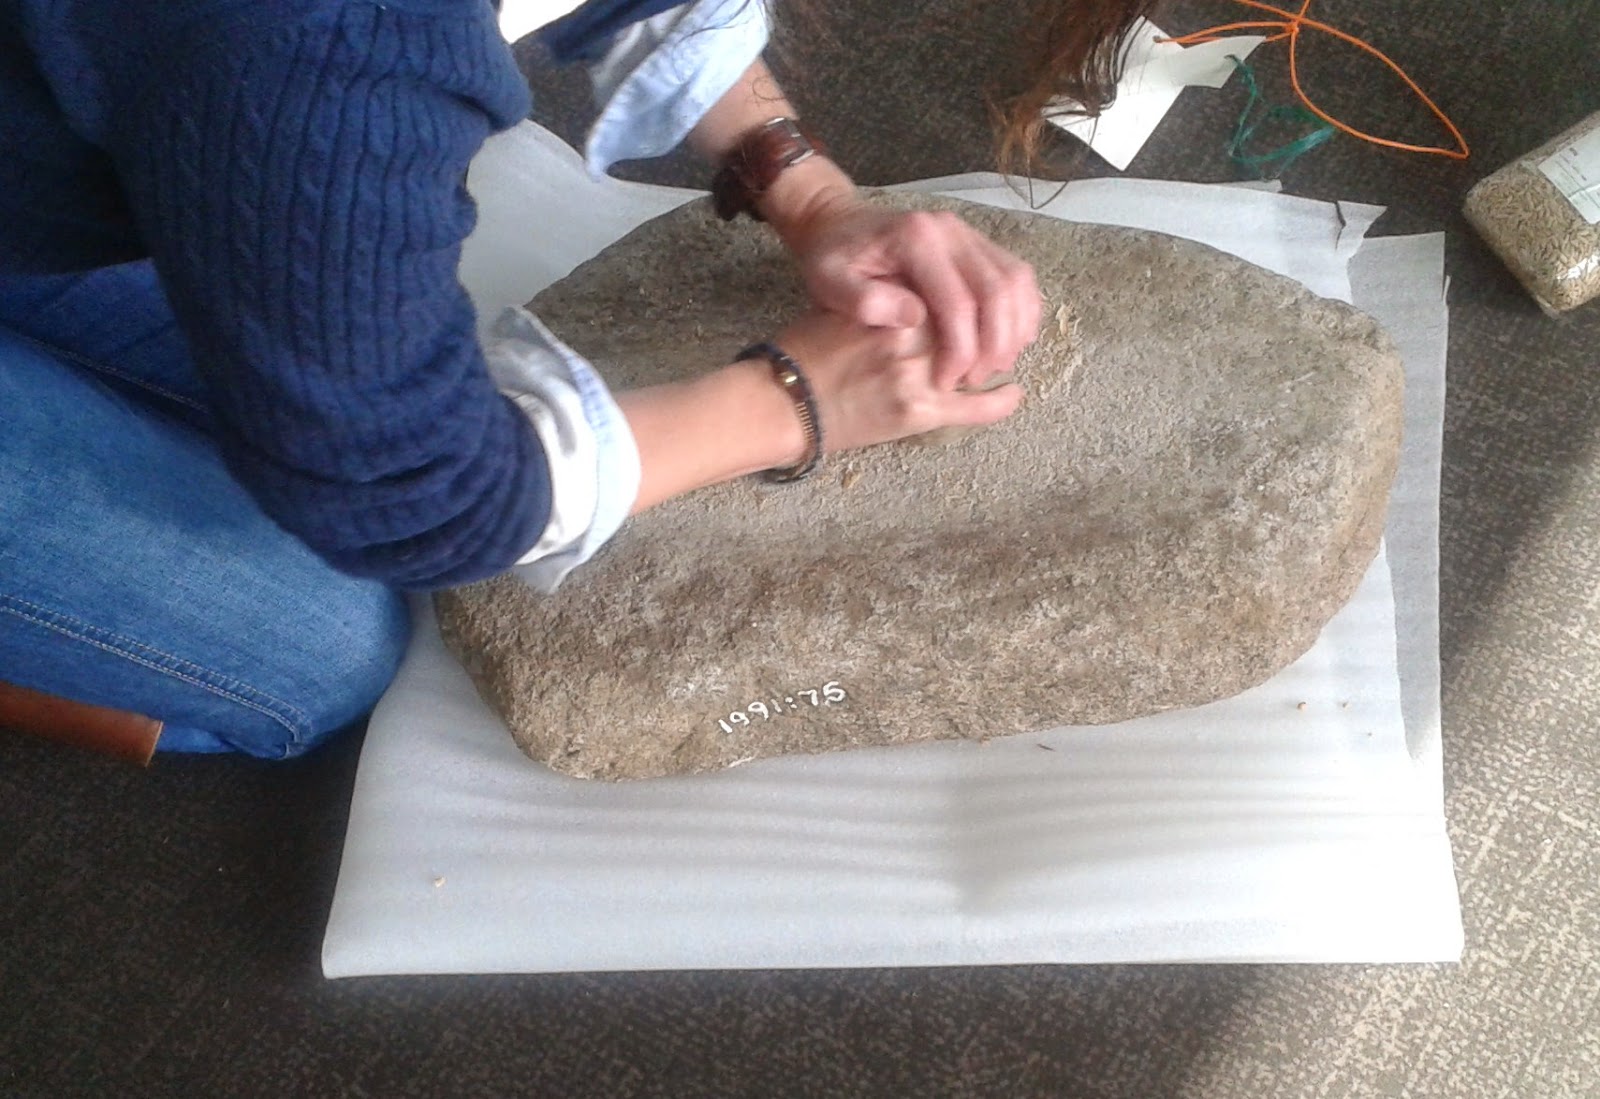 Grinding flour on an ancient quern stone